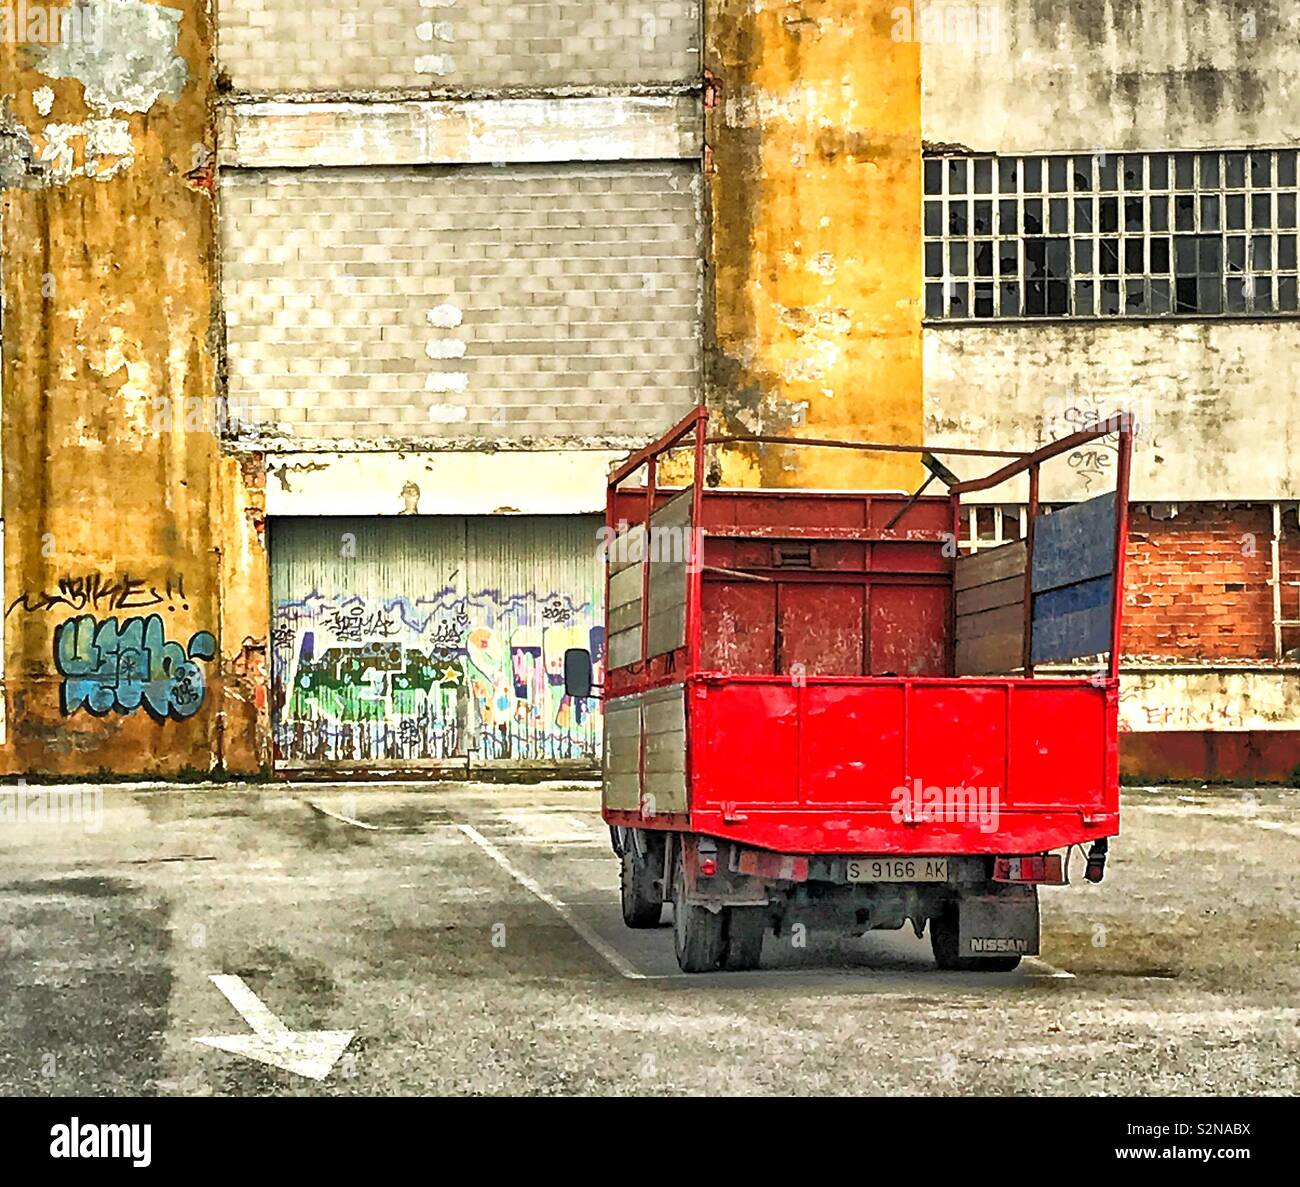 A red truck parked in front of a dilapidated warehouse with graffiti daubed on the walls in the fishing village of Santoña, northwest Spain Stock Photo